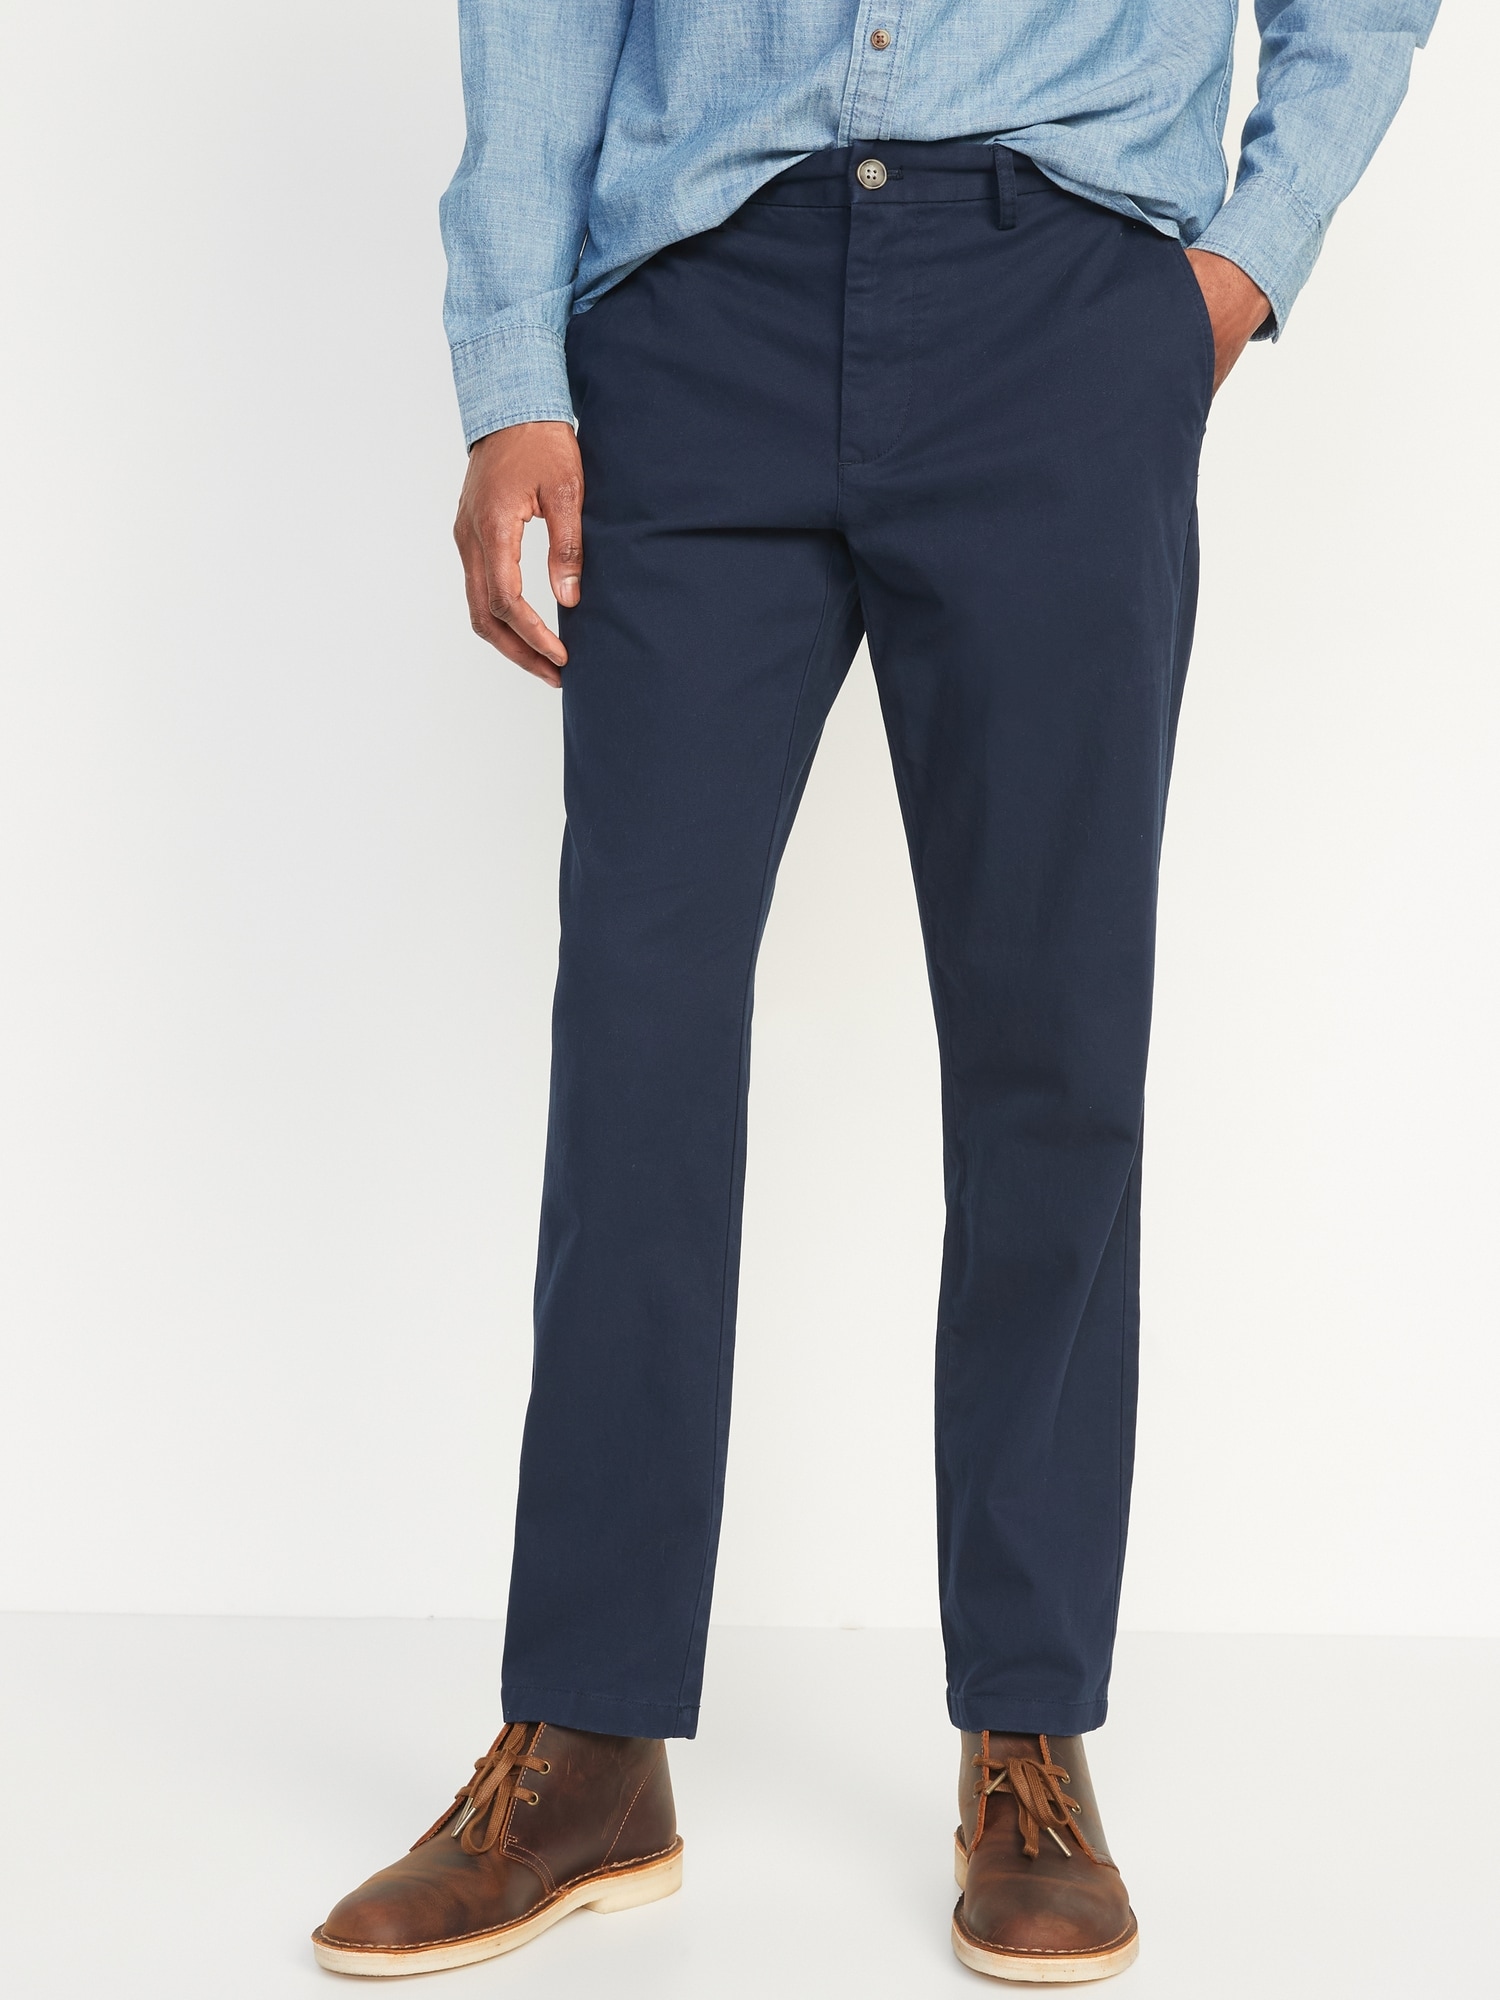 Straight Built-In Flex Rotation Chino Pants for Men | Old Navy